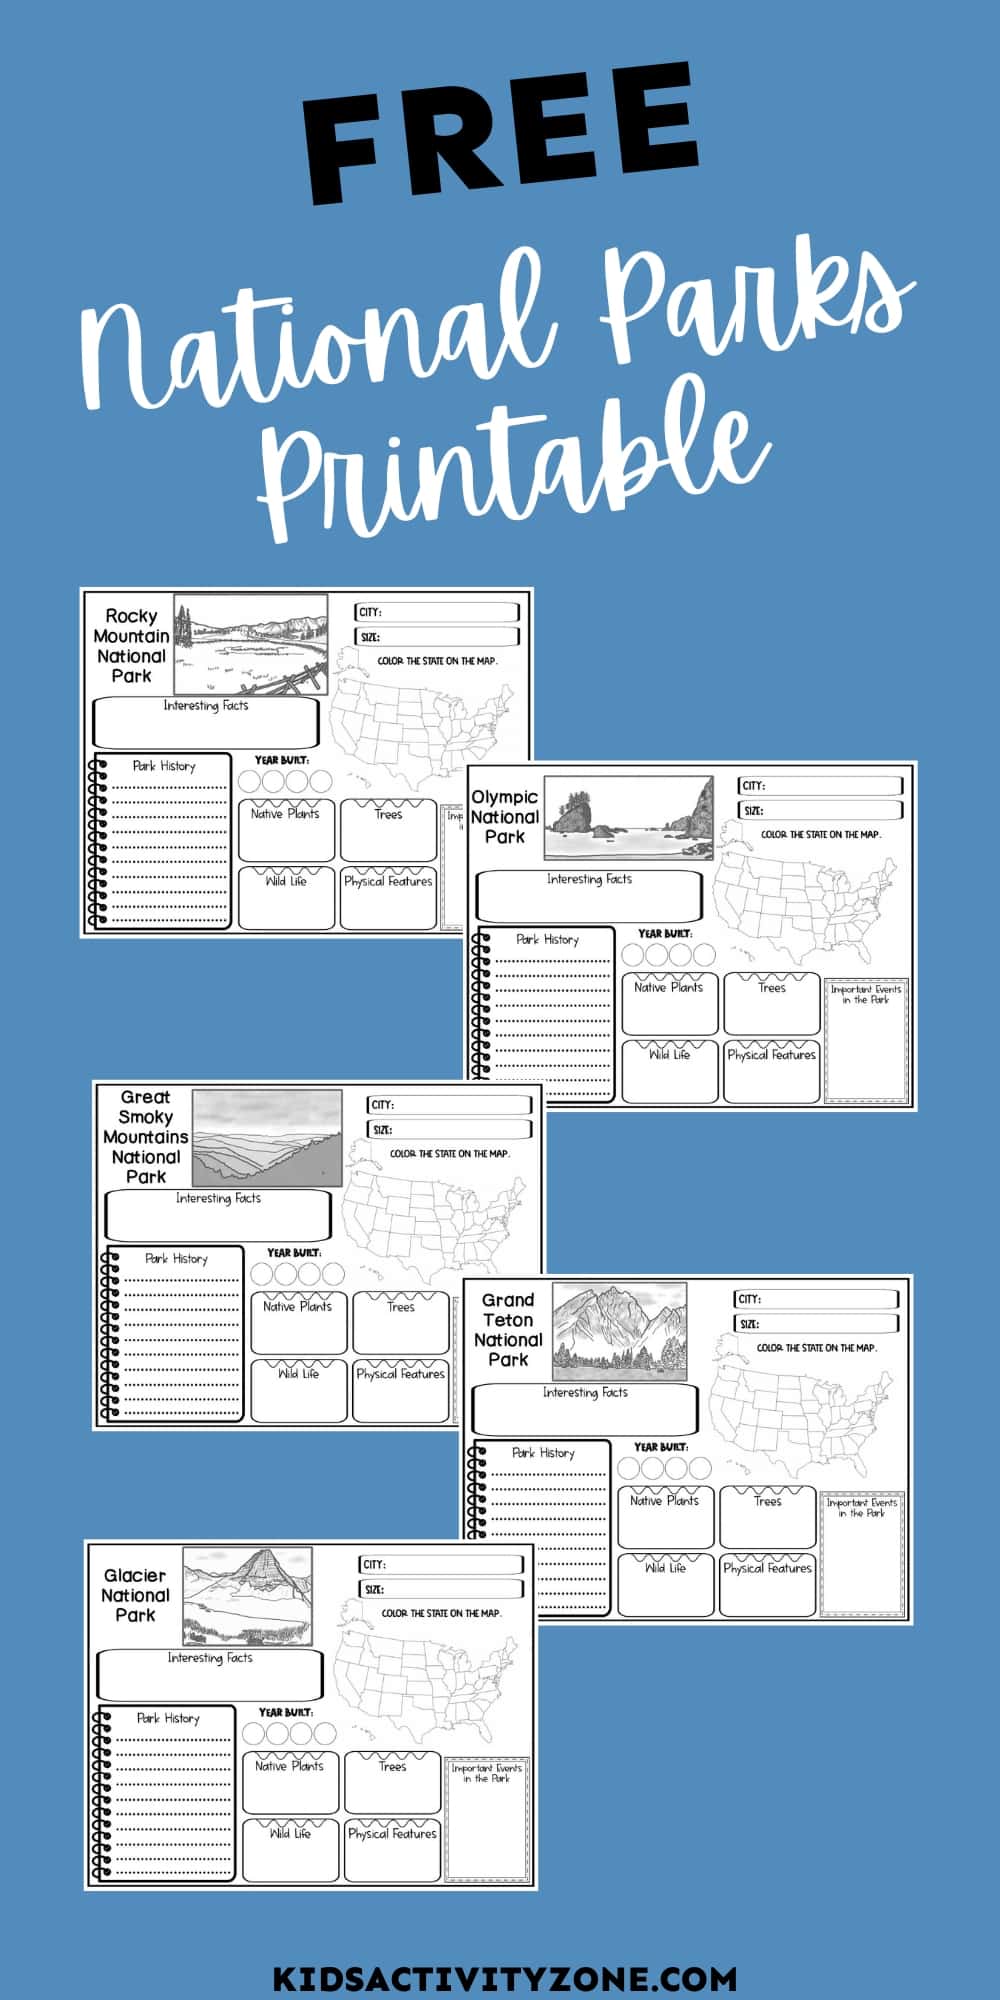 Get these free printable sheets designed to enhance students' knowledge of National Parks! Every National Park features a dedicated page where learners can jot down fascinating details, including the park's location, area, indigenous flora, wildlife, types of trees, historical background, and much more. These printables are an ideal addition to your National Park studies or to enrich your experience while exploring various National Parks.